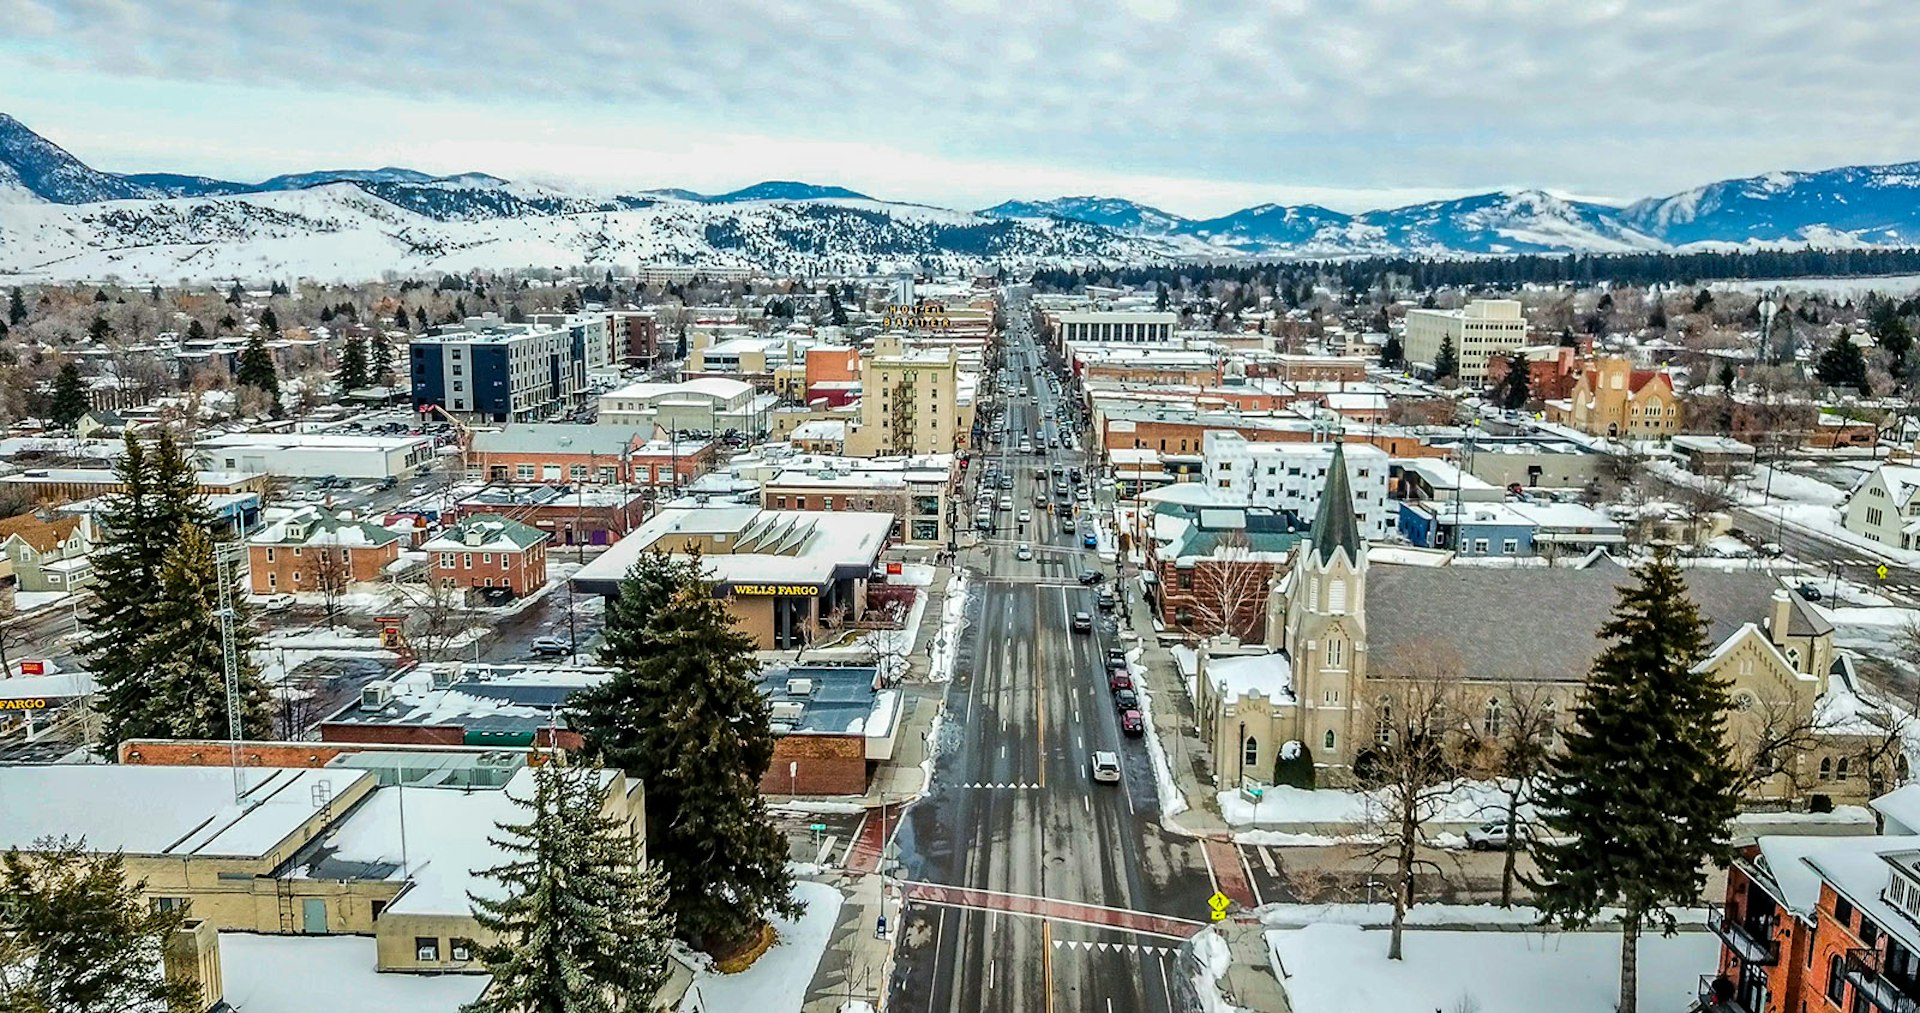 Features - Aerial view of Main Street in Bozeman Montana